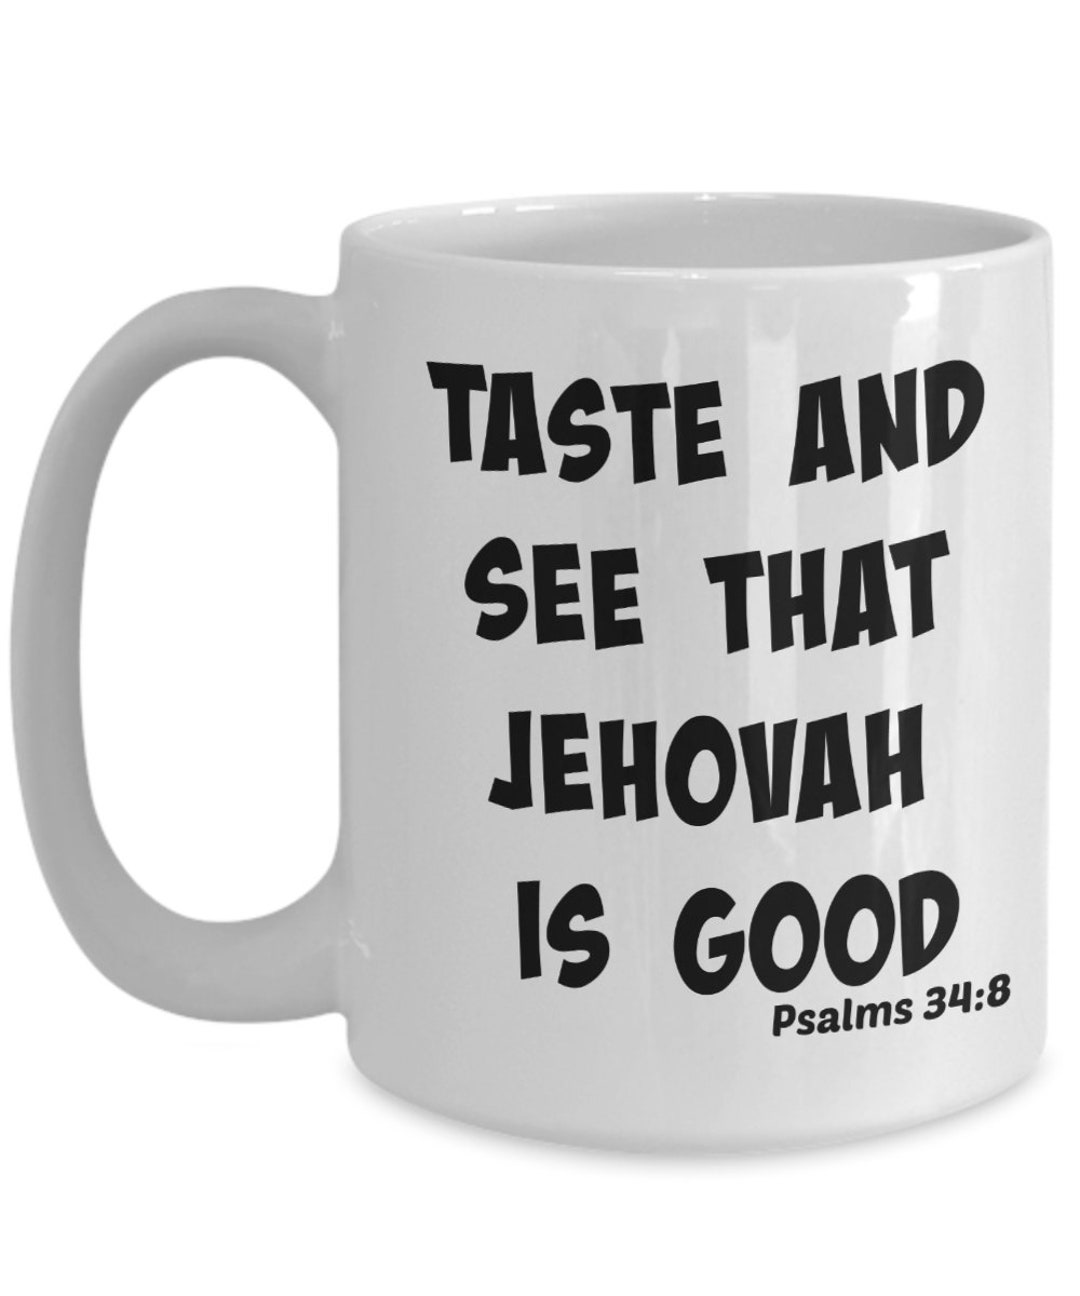 Taste And See That Jehovah Is Good Mug Psalms Mug Can Etsy